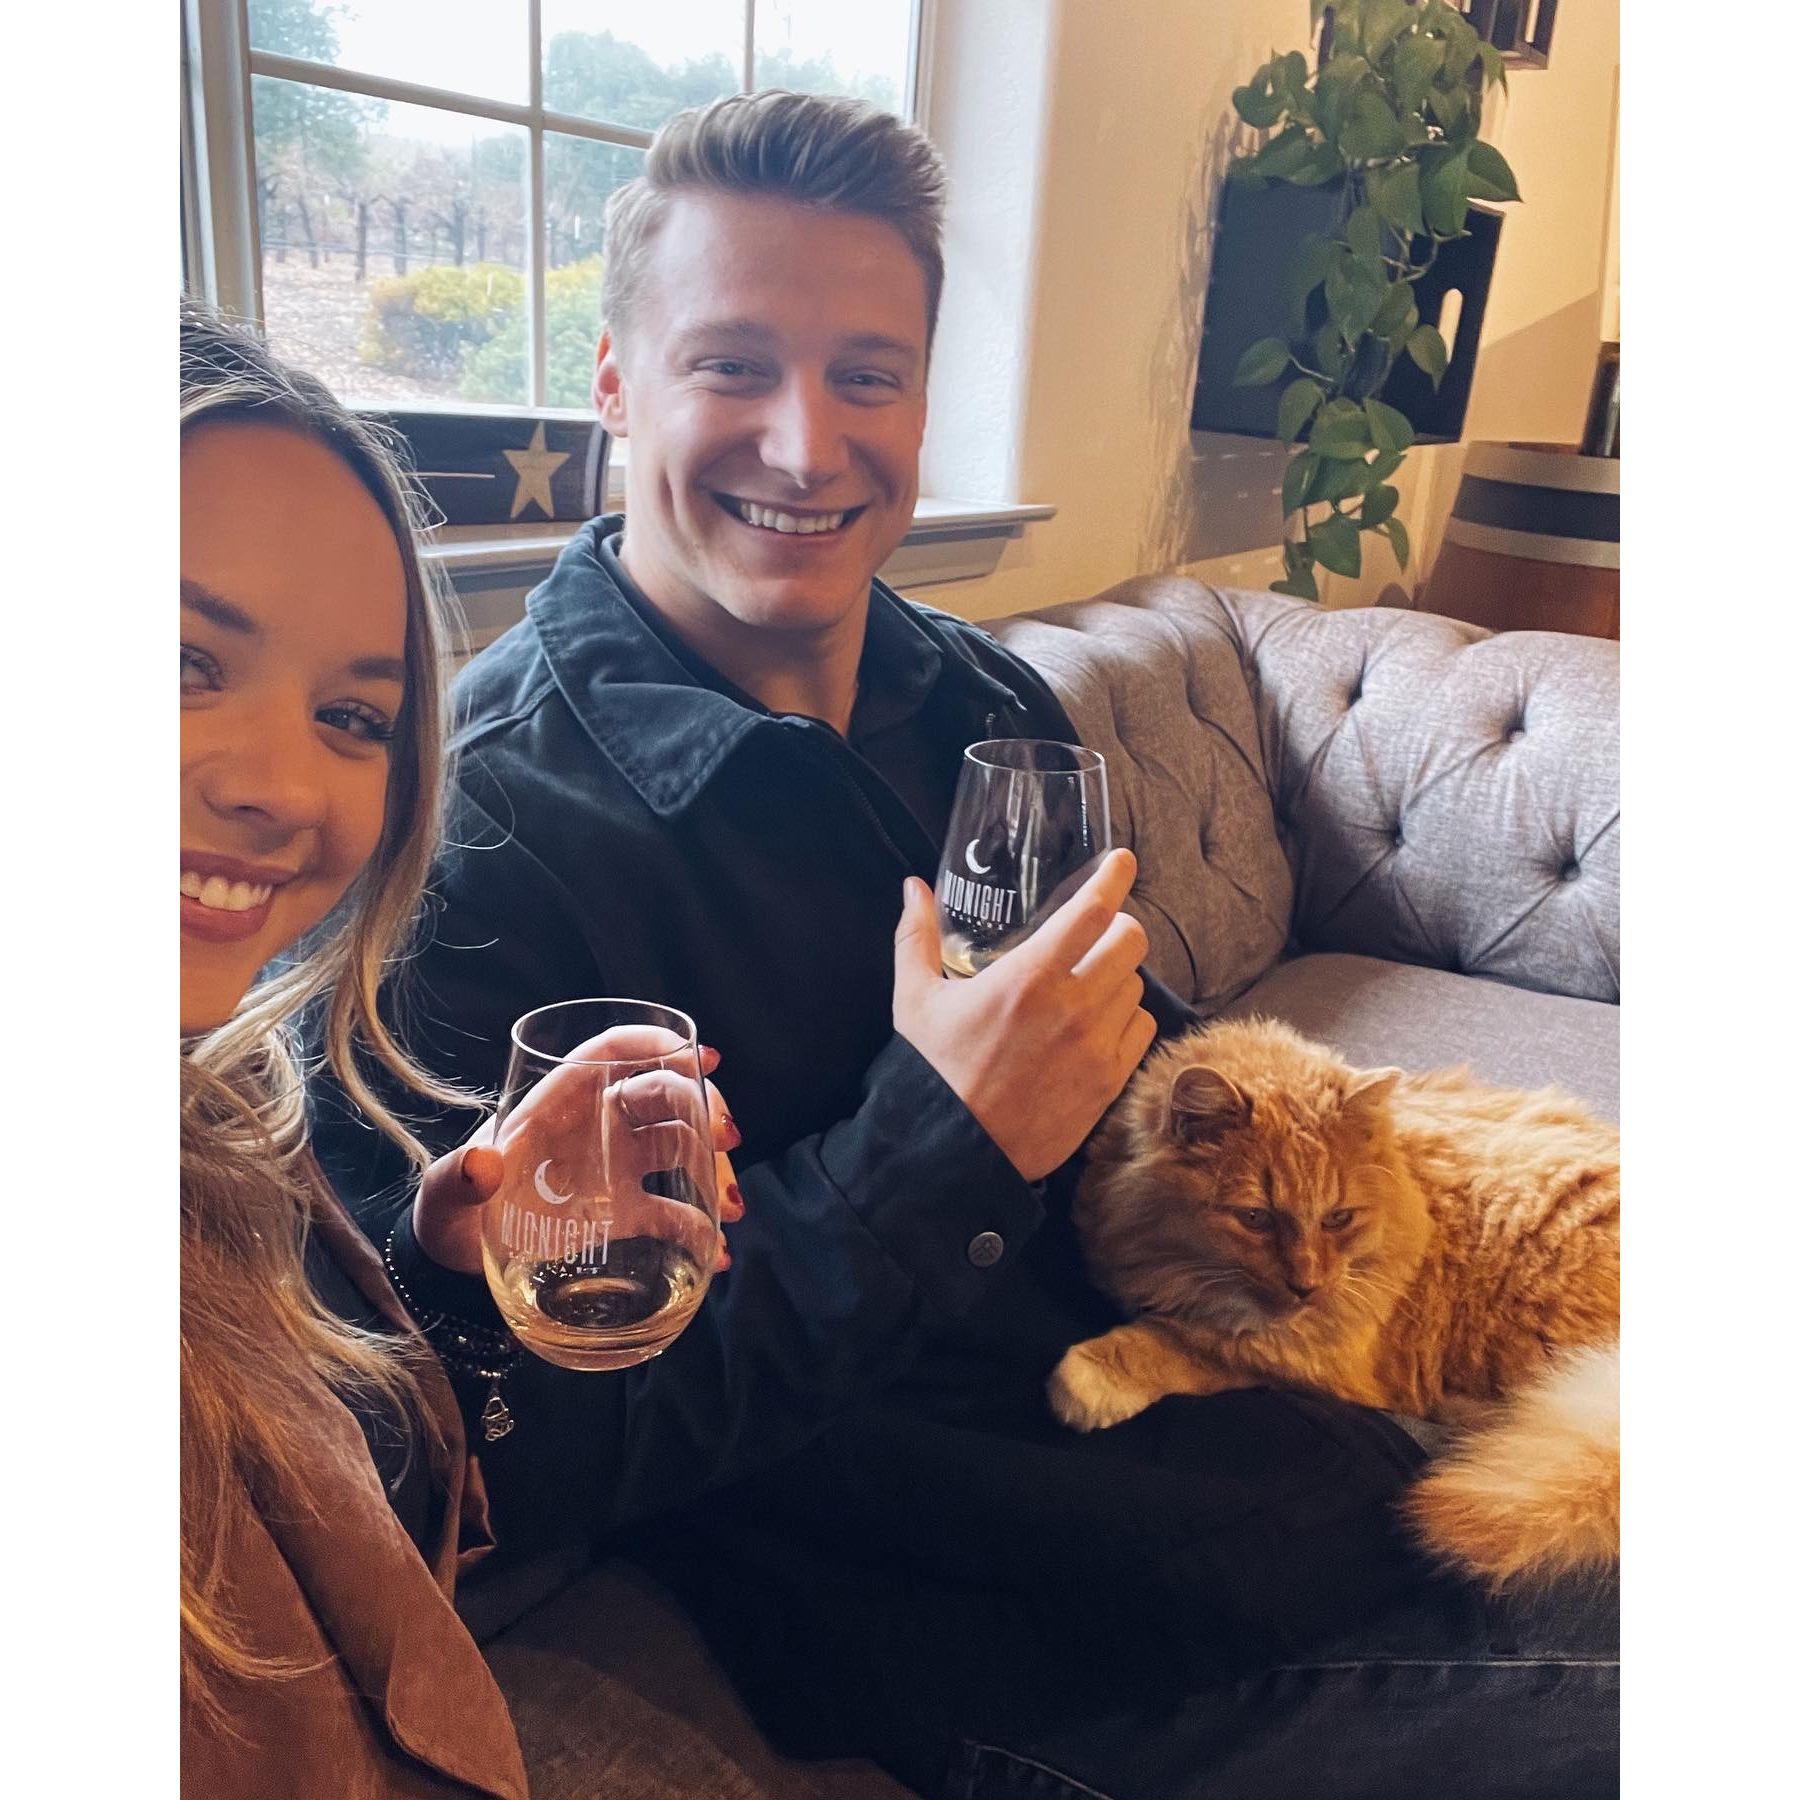 Max and Katie's FAVORITE winery- Midnight Cellars 🍷 also featured, is Leo.